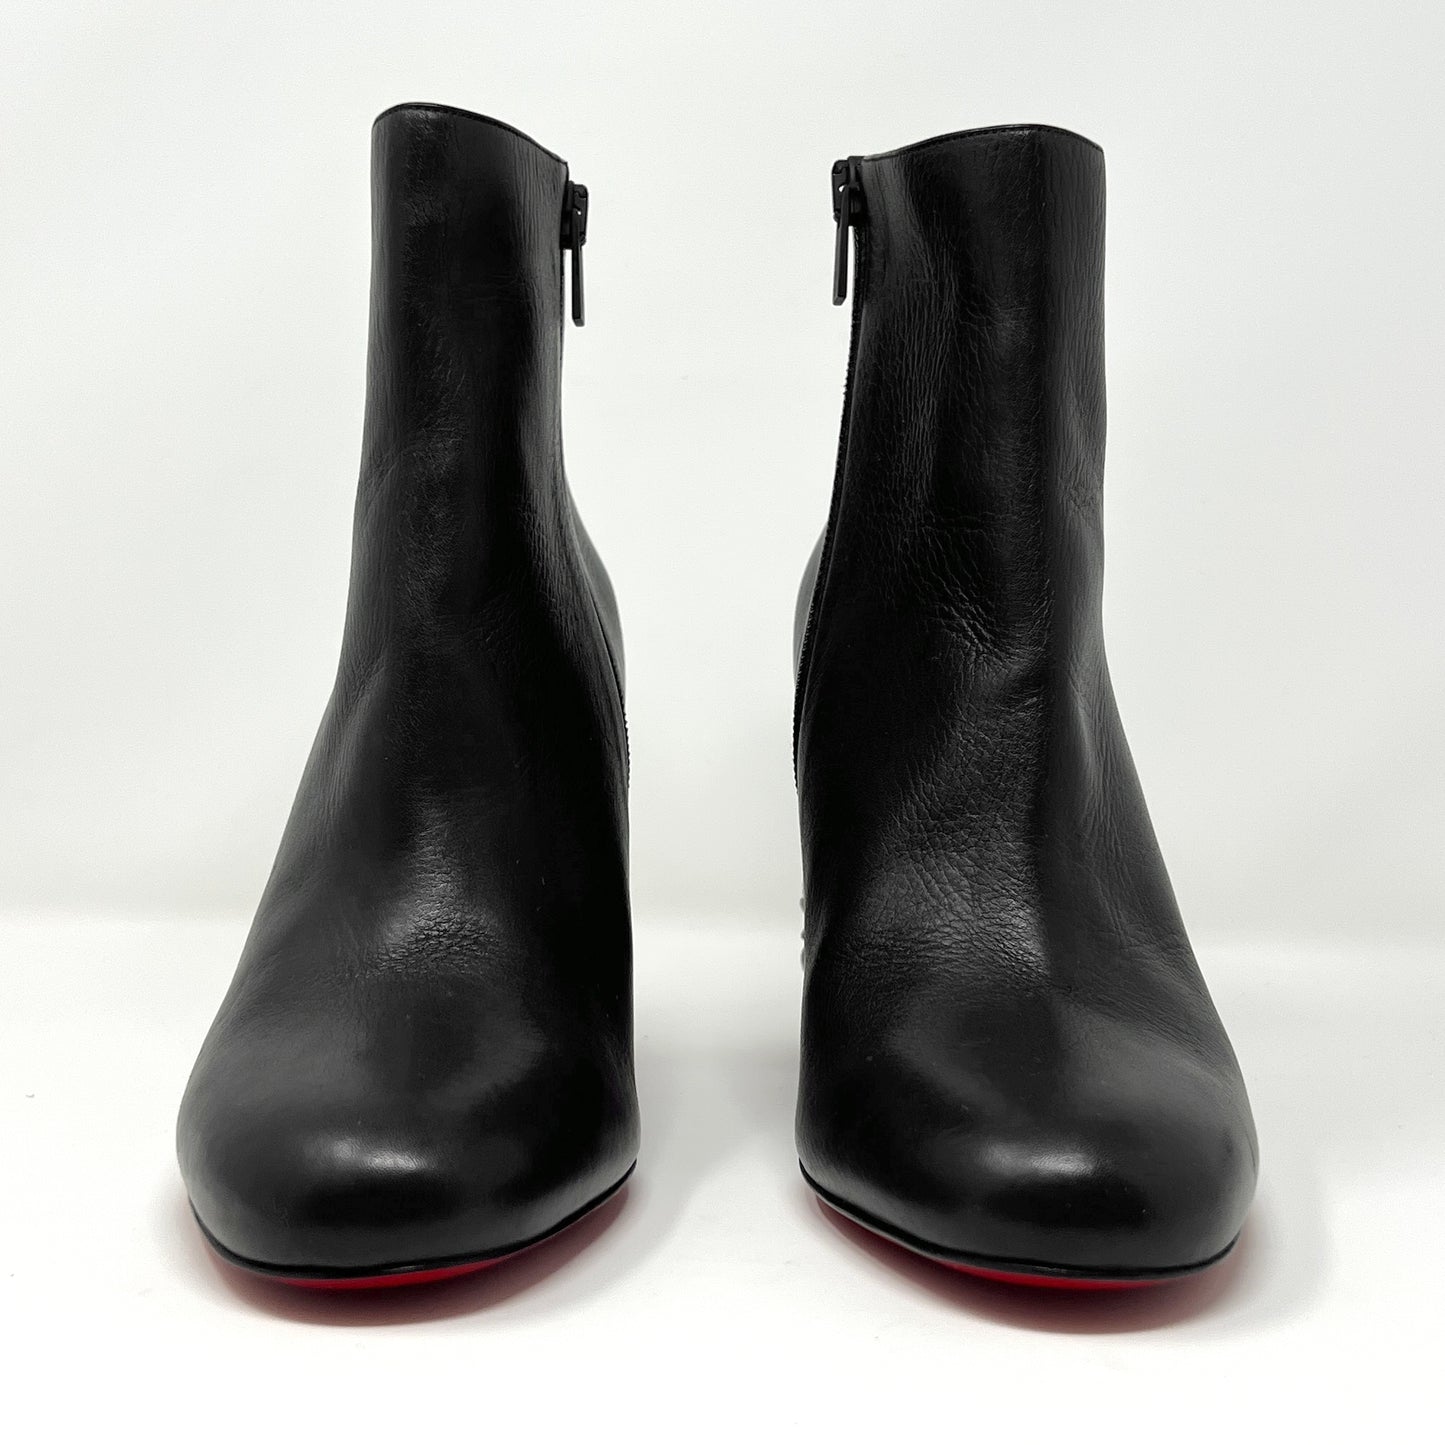 Christian Louboutin Bas Relief Pietra 85 Black Leather Carved Block Heel Boots Size EU 39.5